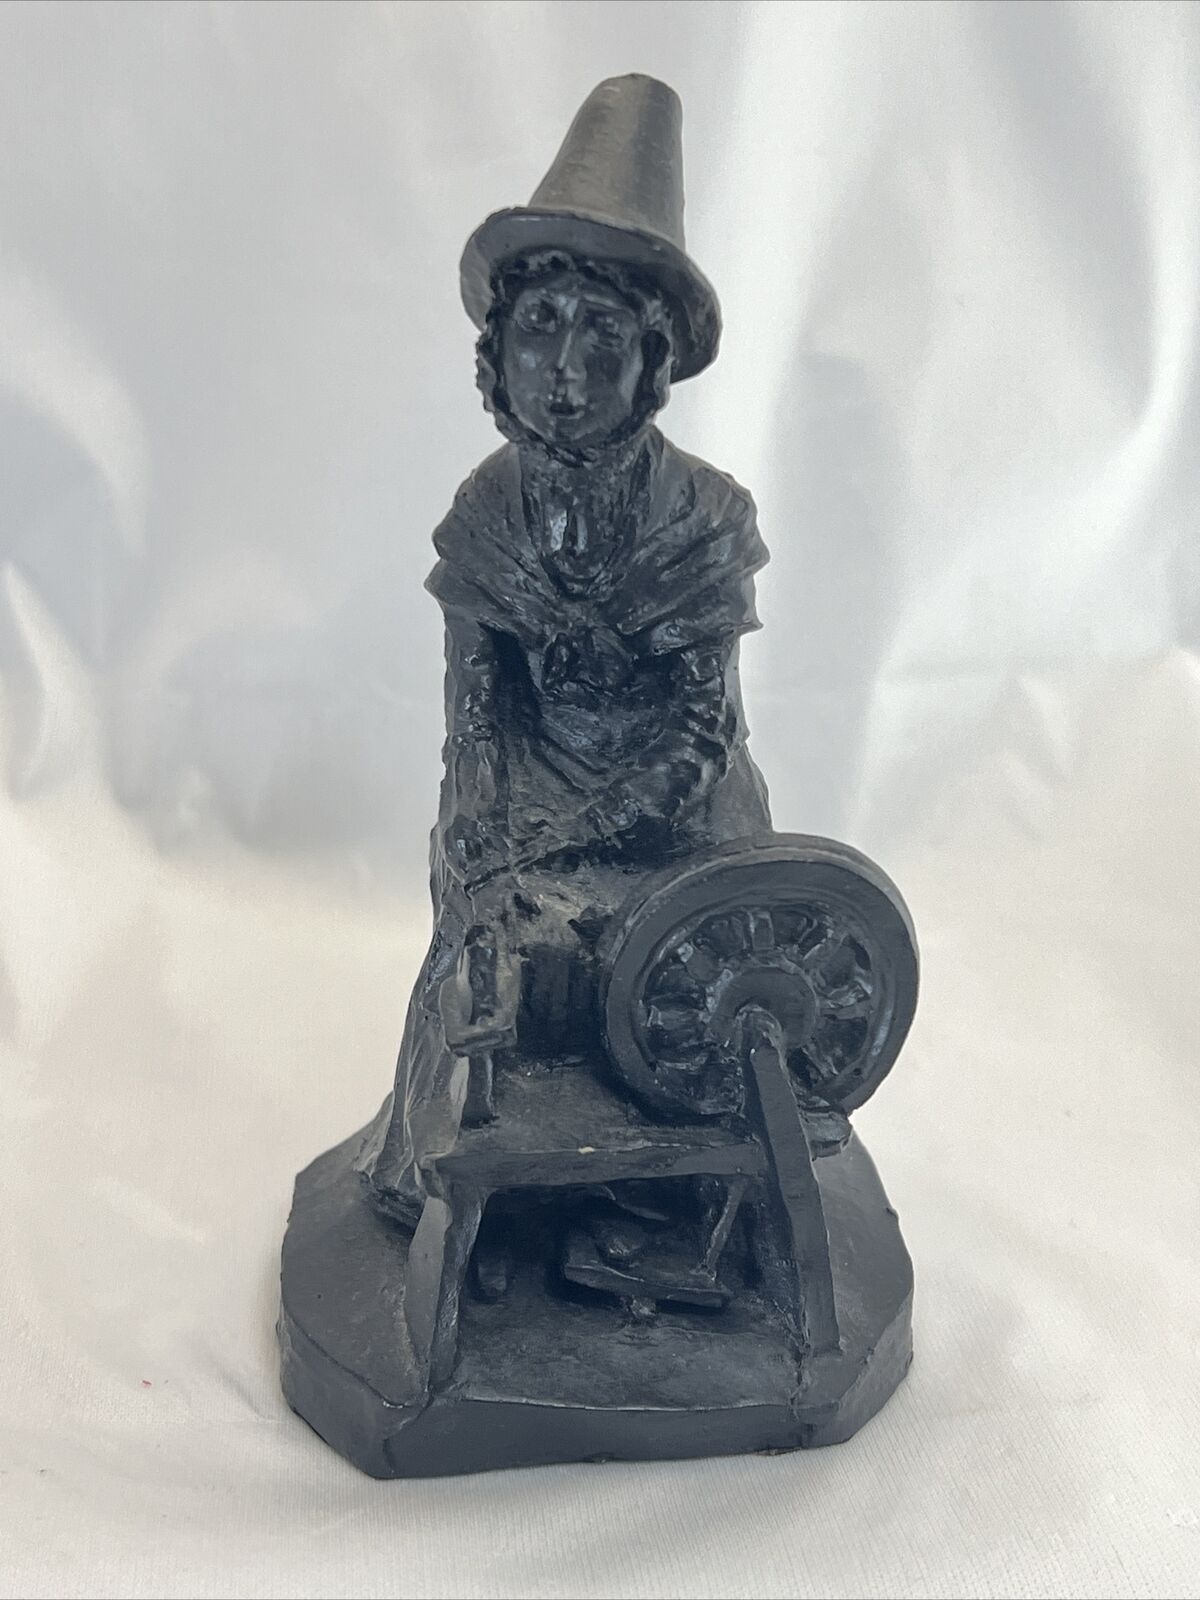 Wales Welsh Lady Coal Figurine  Spinning Wheel Made With Coal From Wales 5.5”